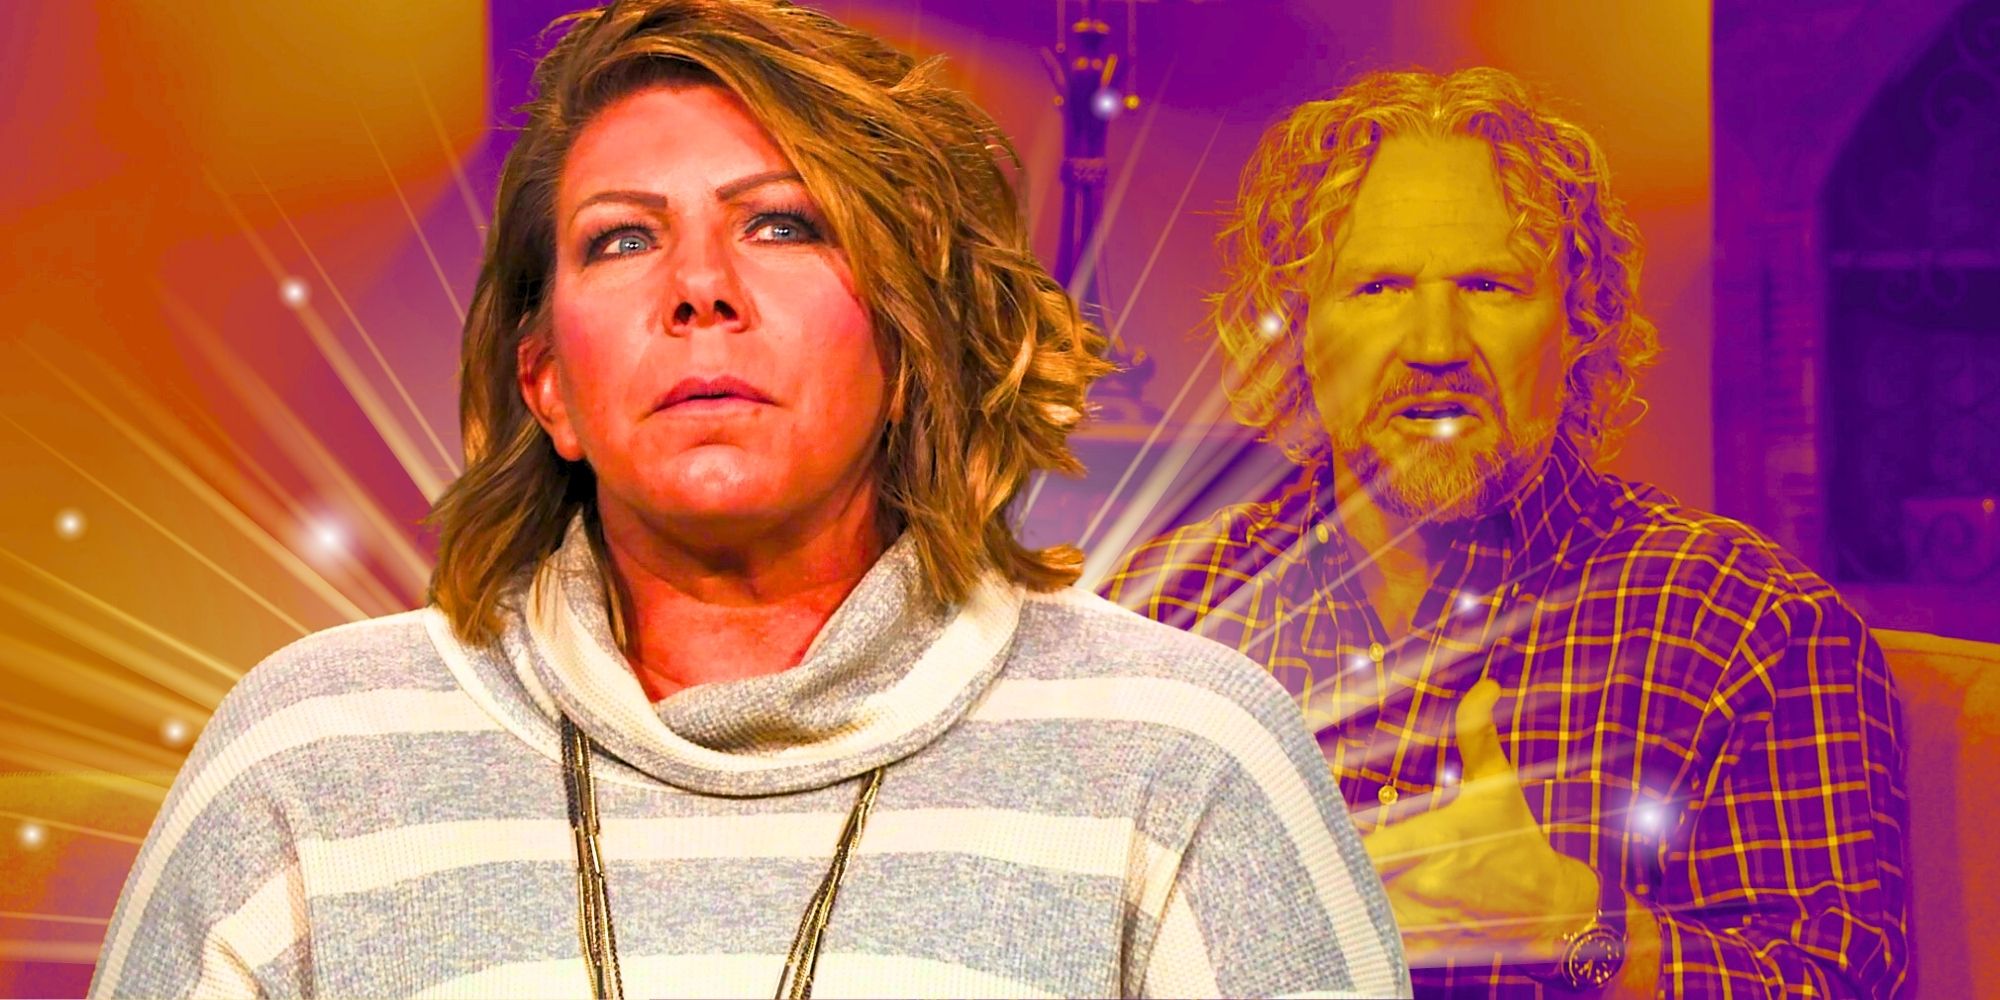 Meri Brown of Sister Wives with kody in the background with purple, red and yellow filter background